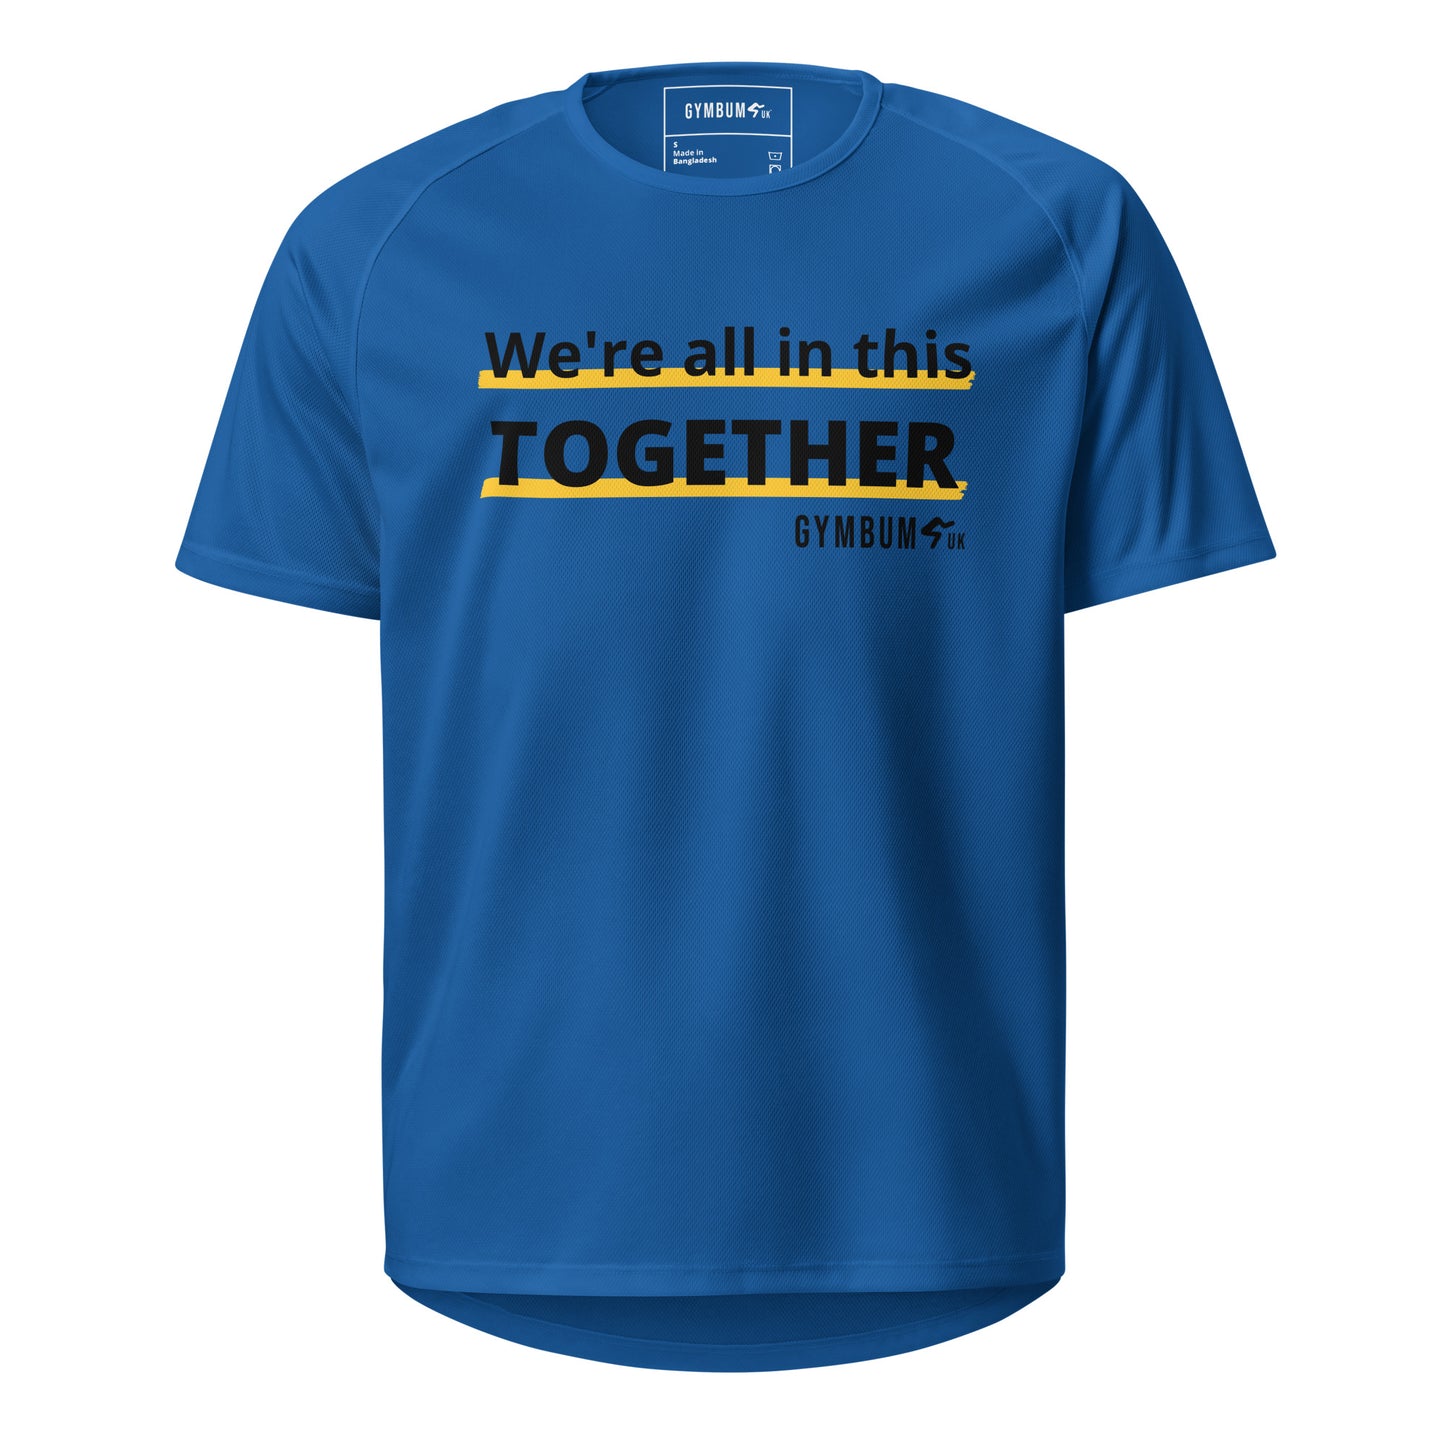 The GymbumUK We Are In This Together QuickDry Performance T-Shirt